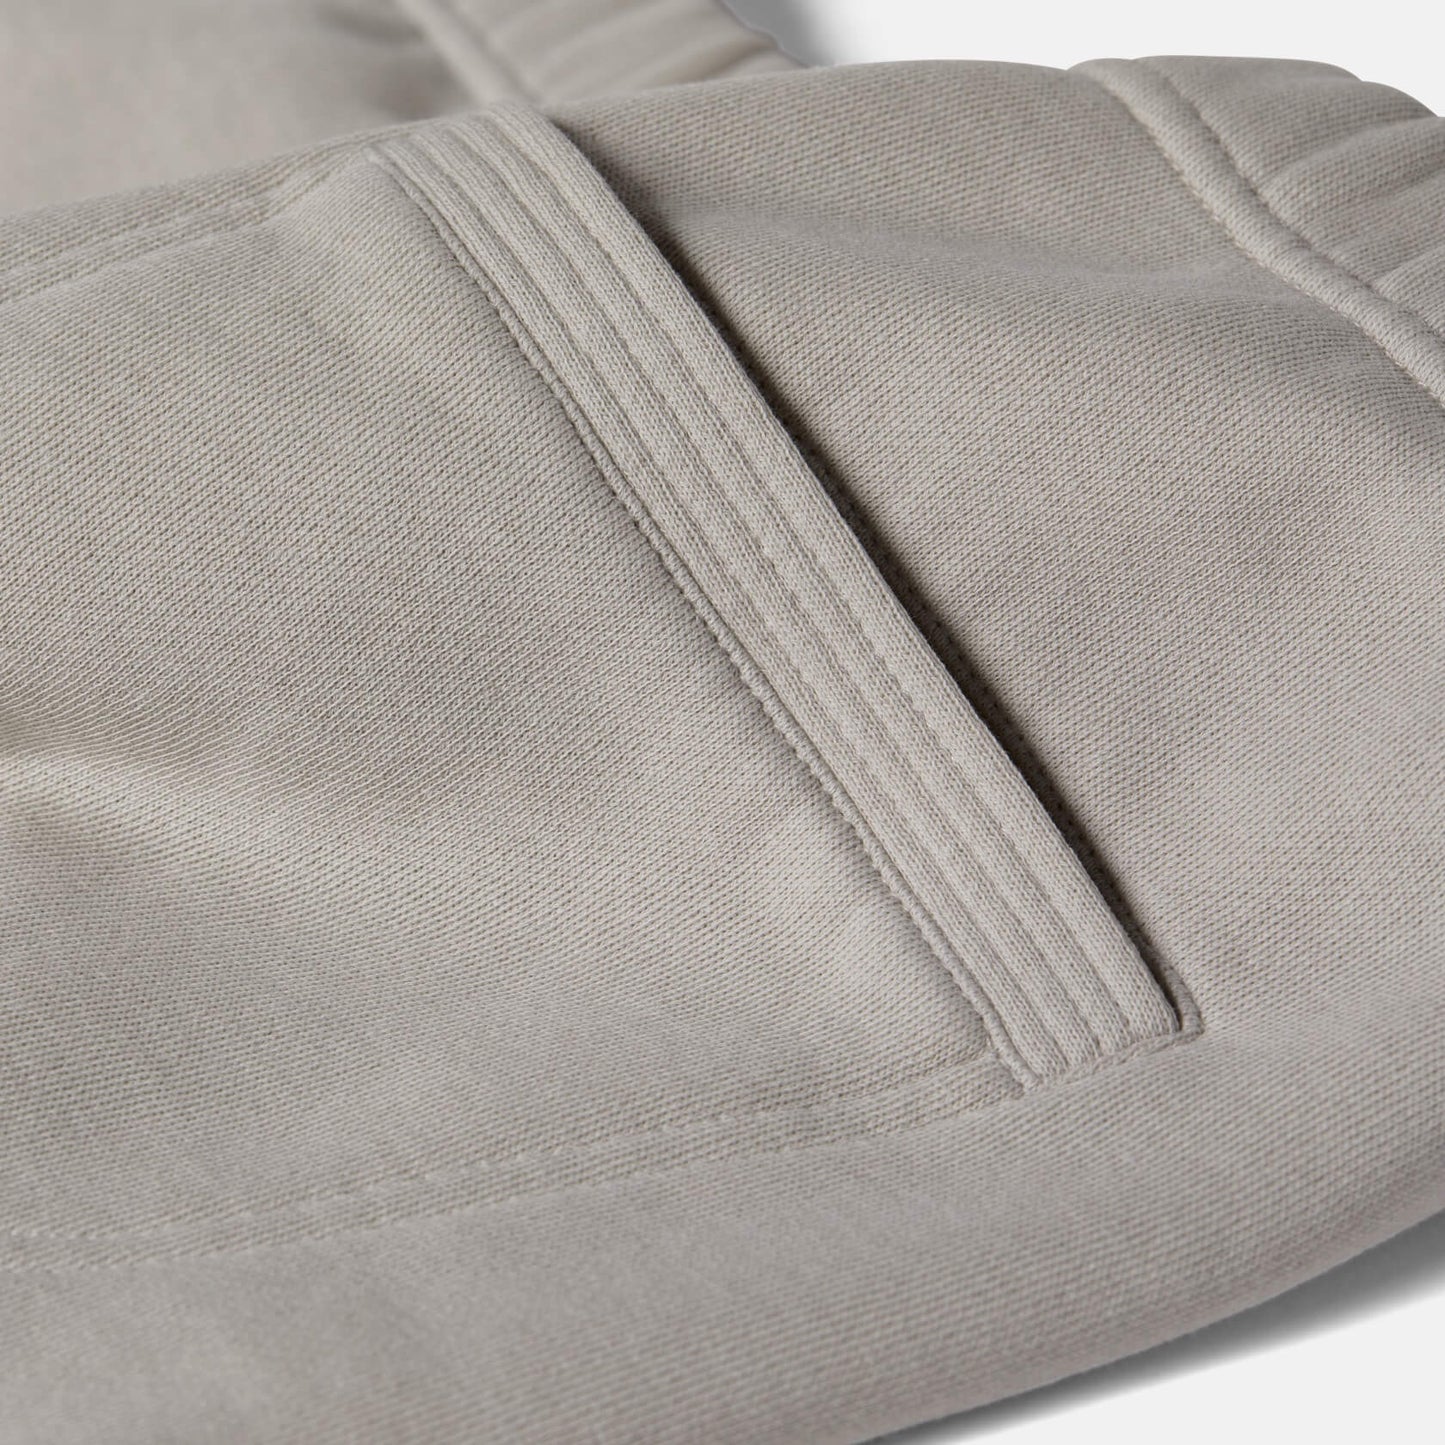 Gameday Sweatpant |Cement / Charcoal| back pocket detail